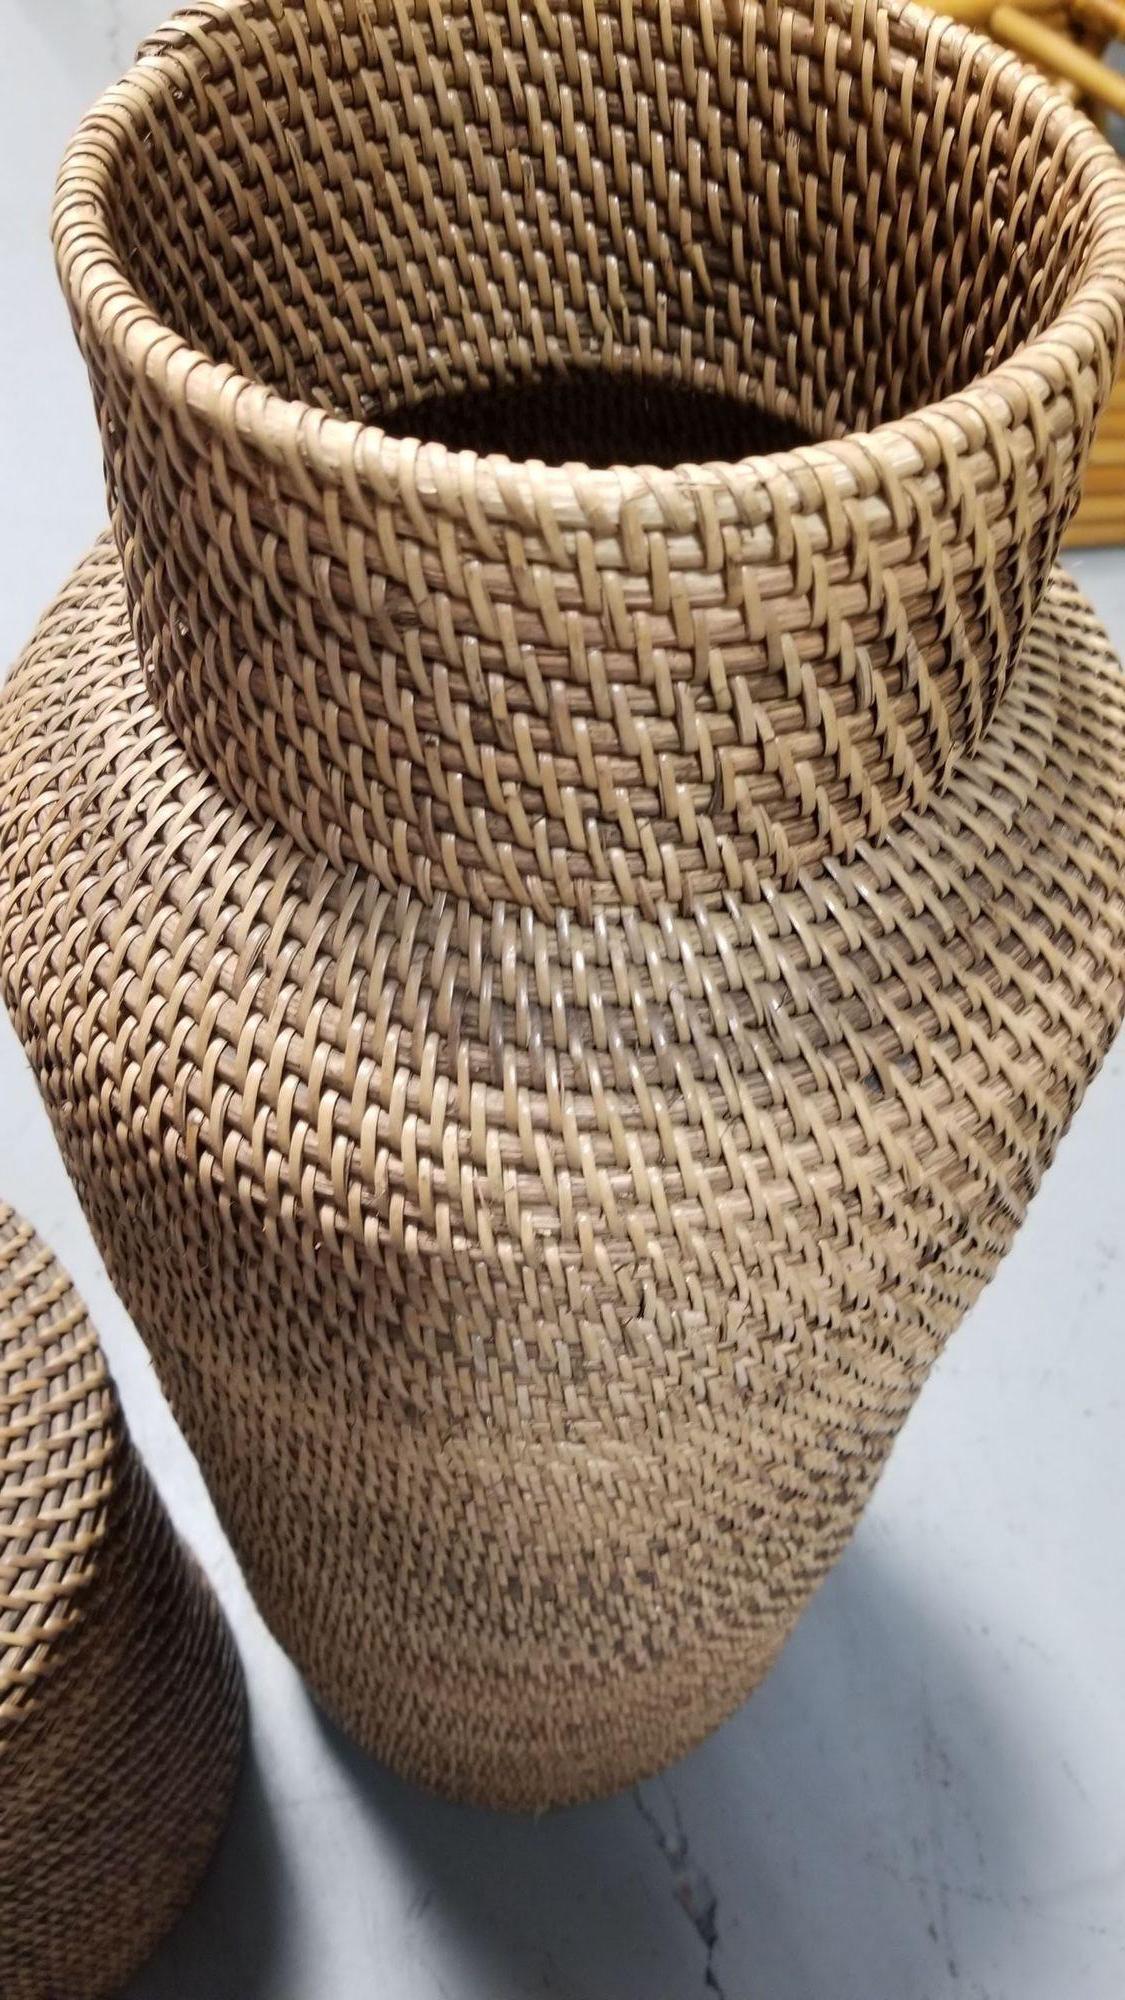 Restored Reed Rattan Wicker Decorative Vases Gabriella Crespi Styled - Pair of 2 For Sale 1